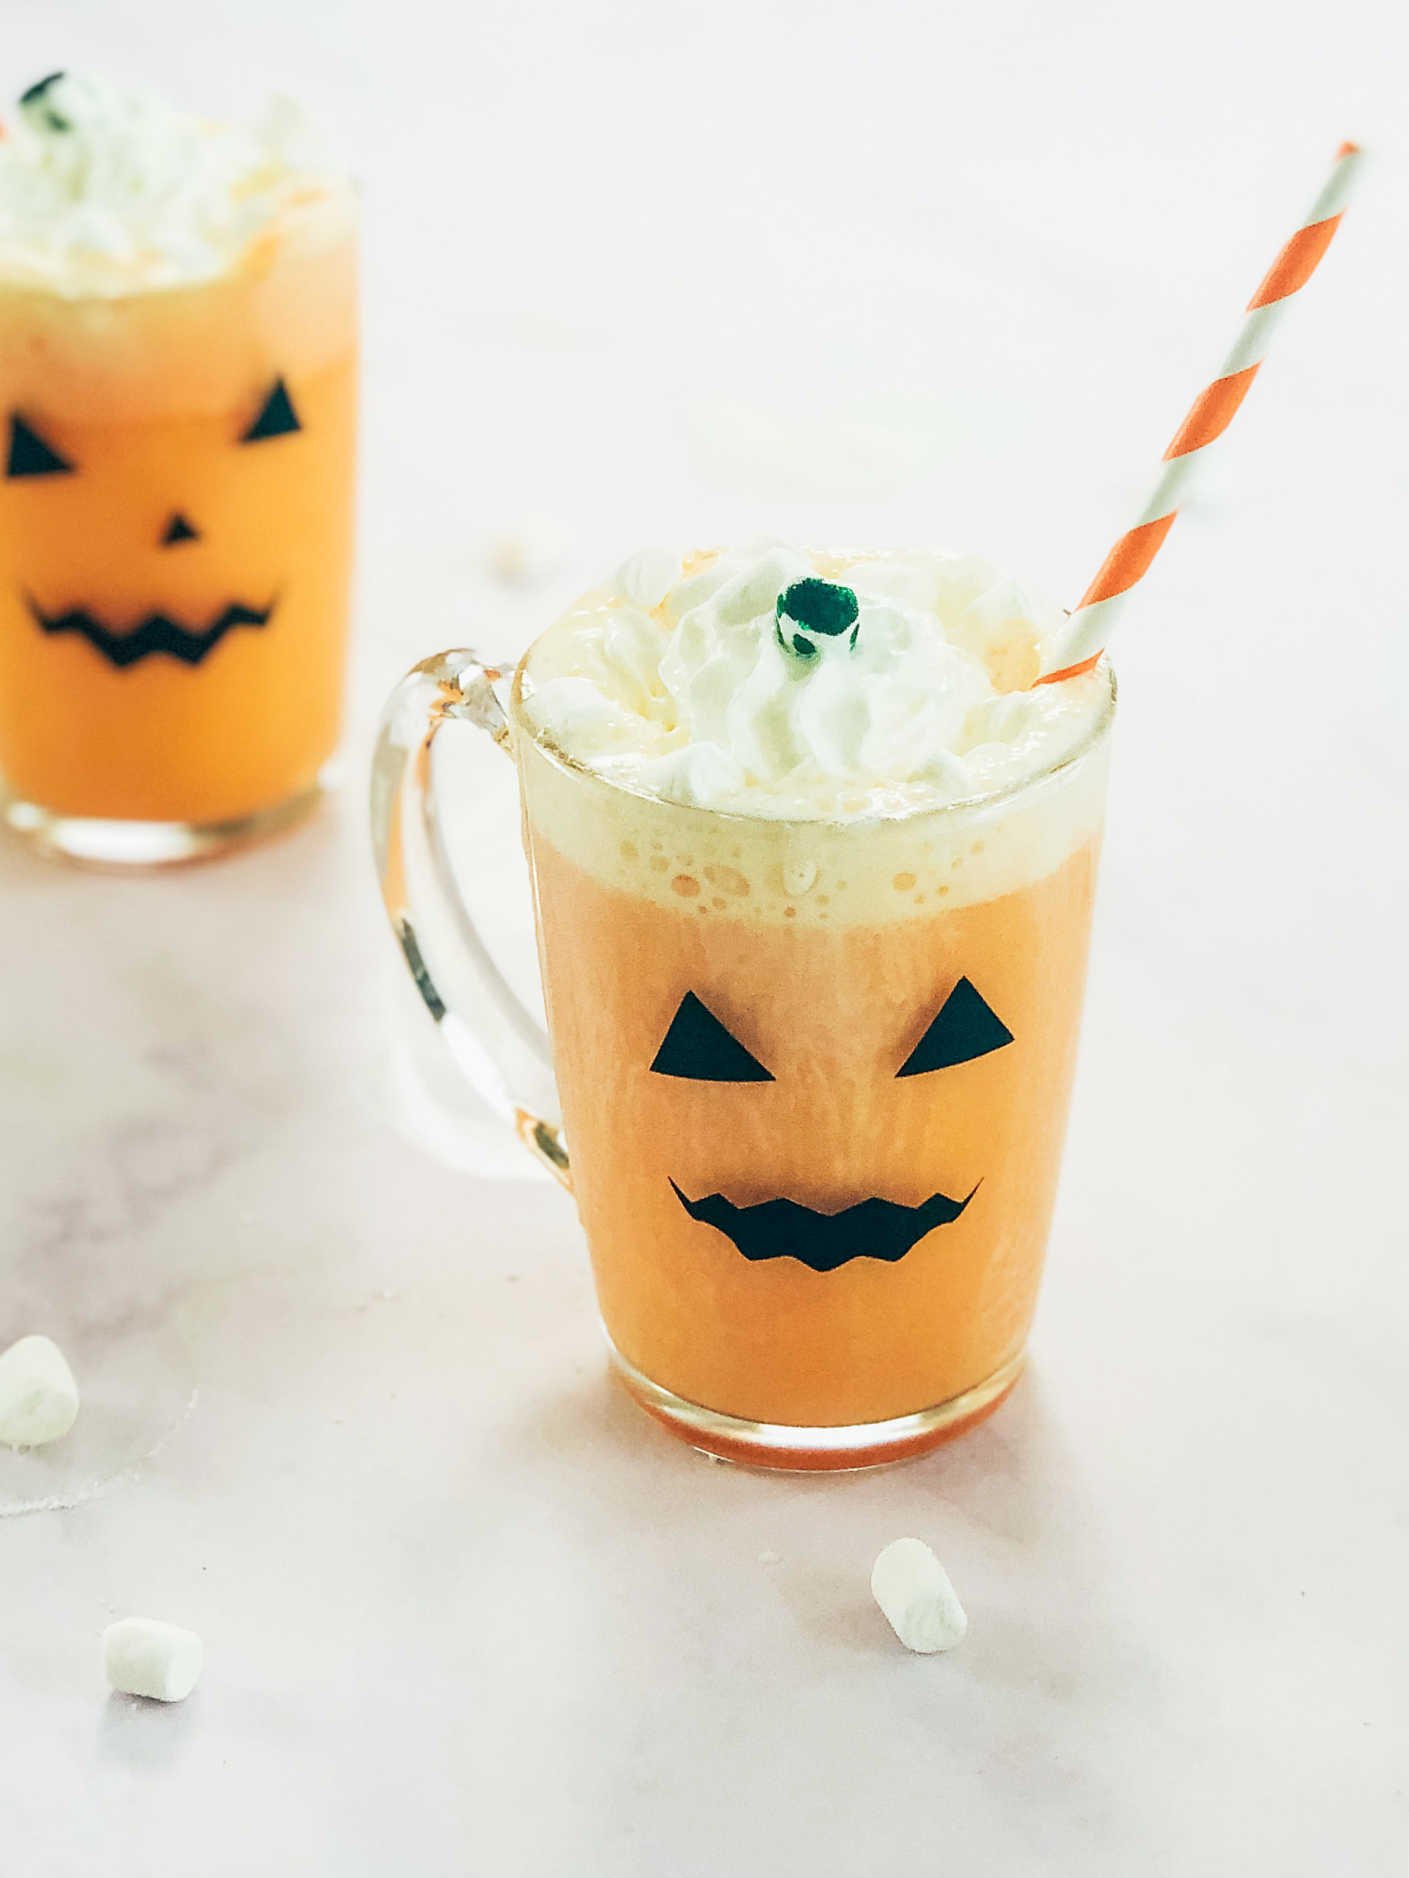 How to make hot chocolate for Halloween parties